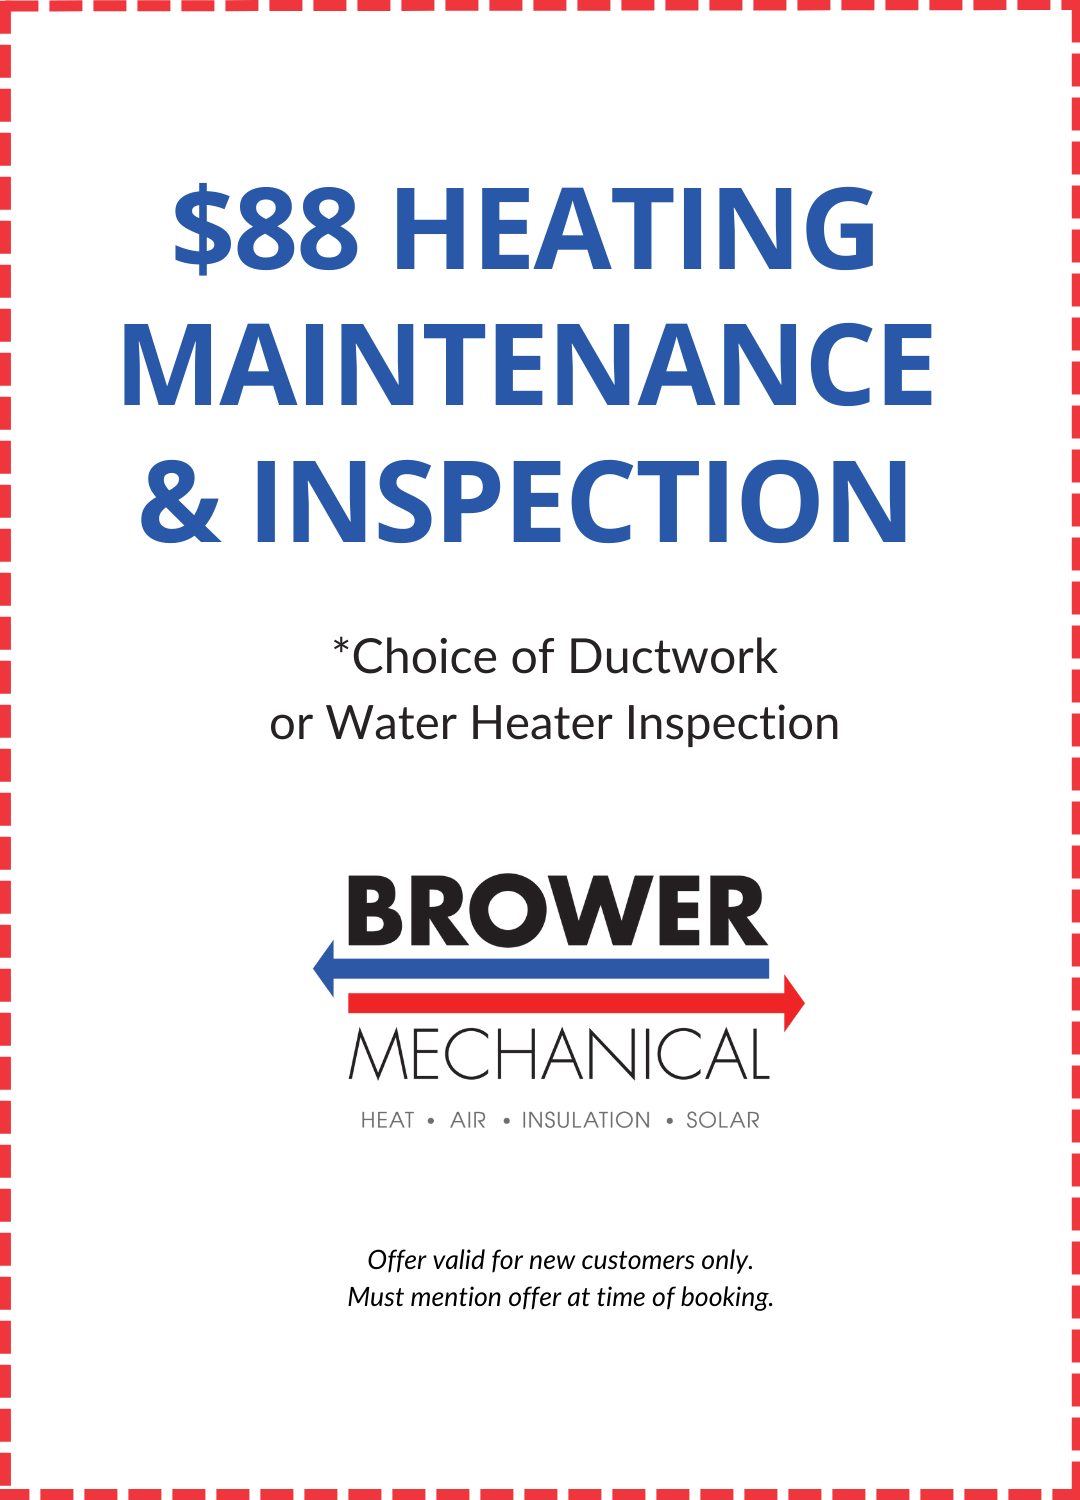 Brower Special $88 Heating Maintenance Graphic Coupon